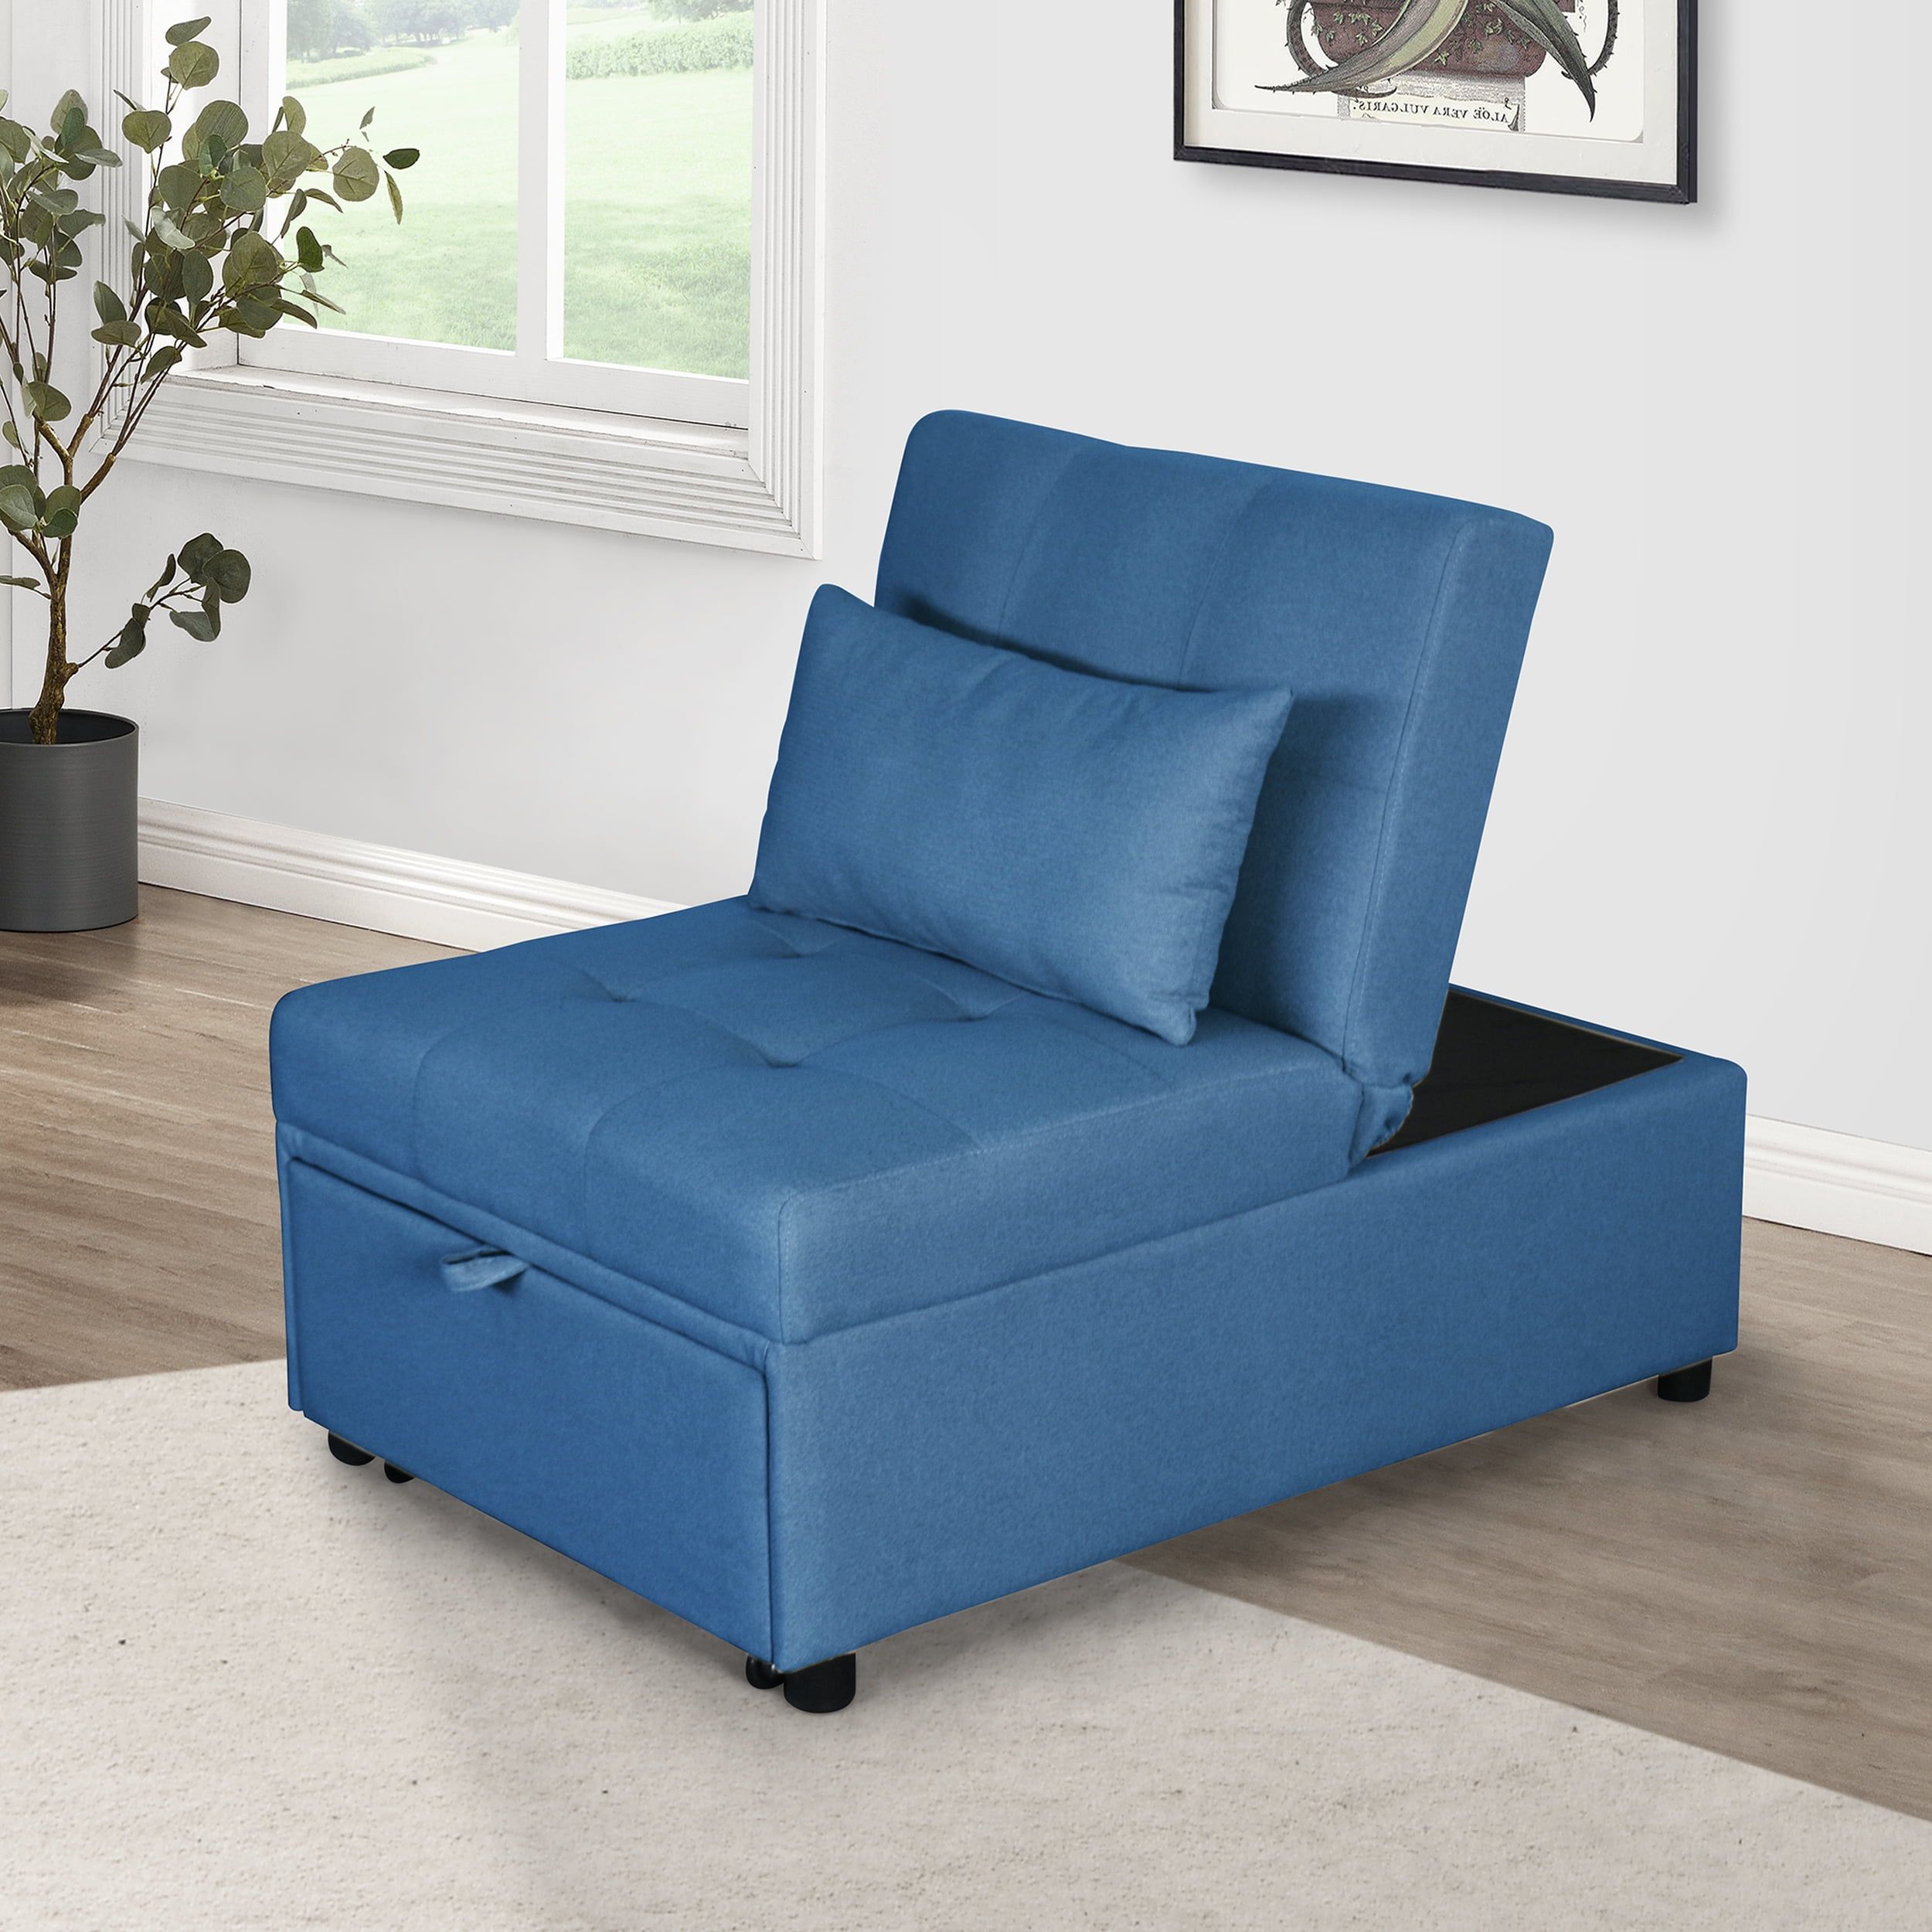 Sofa Bed, Convertible Chair Sleeper Bed, 4 In 1 Multi Function Folding  Ottoman Modern Breathable Fabric Guest Bed With Adjustable Sleeper For  Small Room Apartment (Blue) – Walmart With 4 In 1 Convertible Sleeper Chair Beds (View 8 of 15)